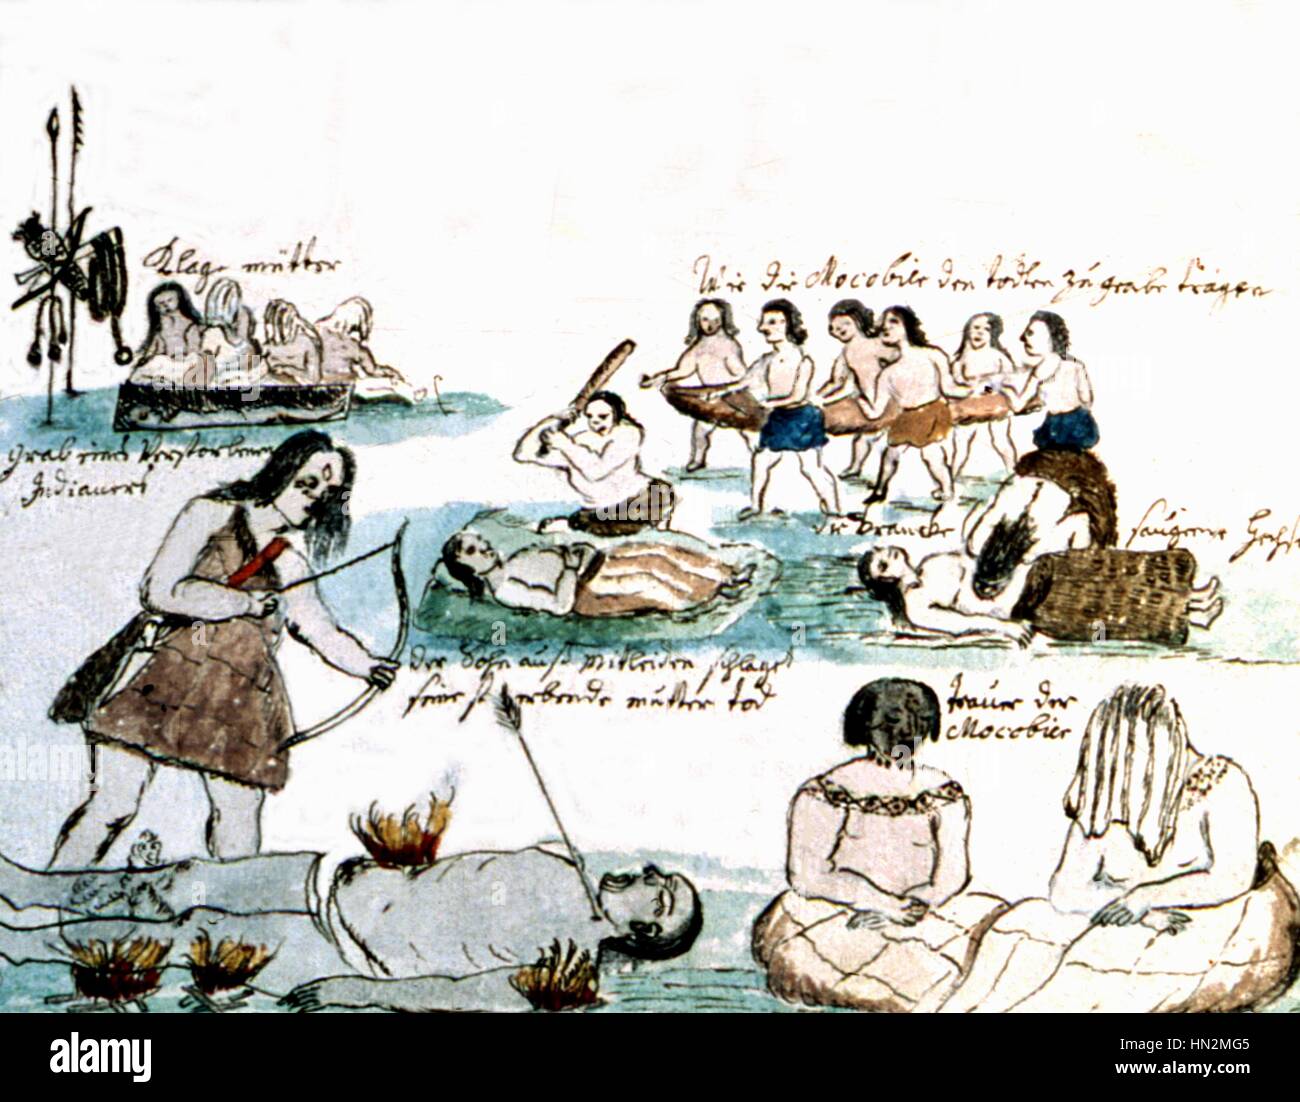 Illustration by Florian Baucke (1749-1767). Zwettler Codex. Life of Guarani Indians seen by a Jesuit father. Burial. Women crying. The bonesetter sucks a sick person. A child killing his father who was 'punishing' him. Death of the ennemy. Paraguay 18th c Stock Photo